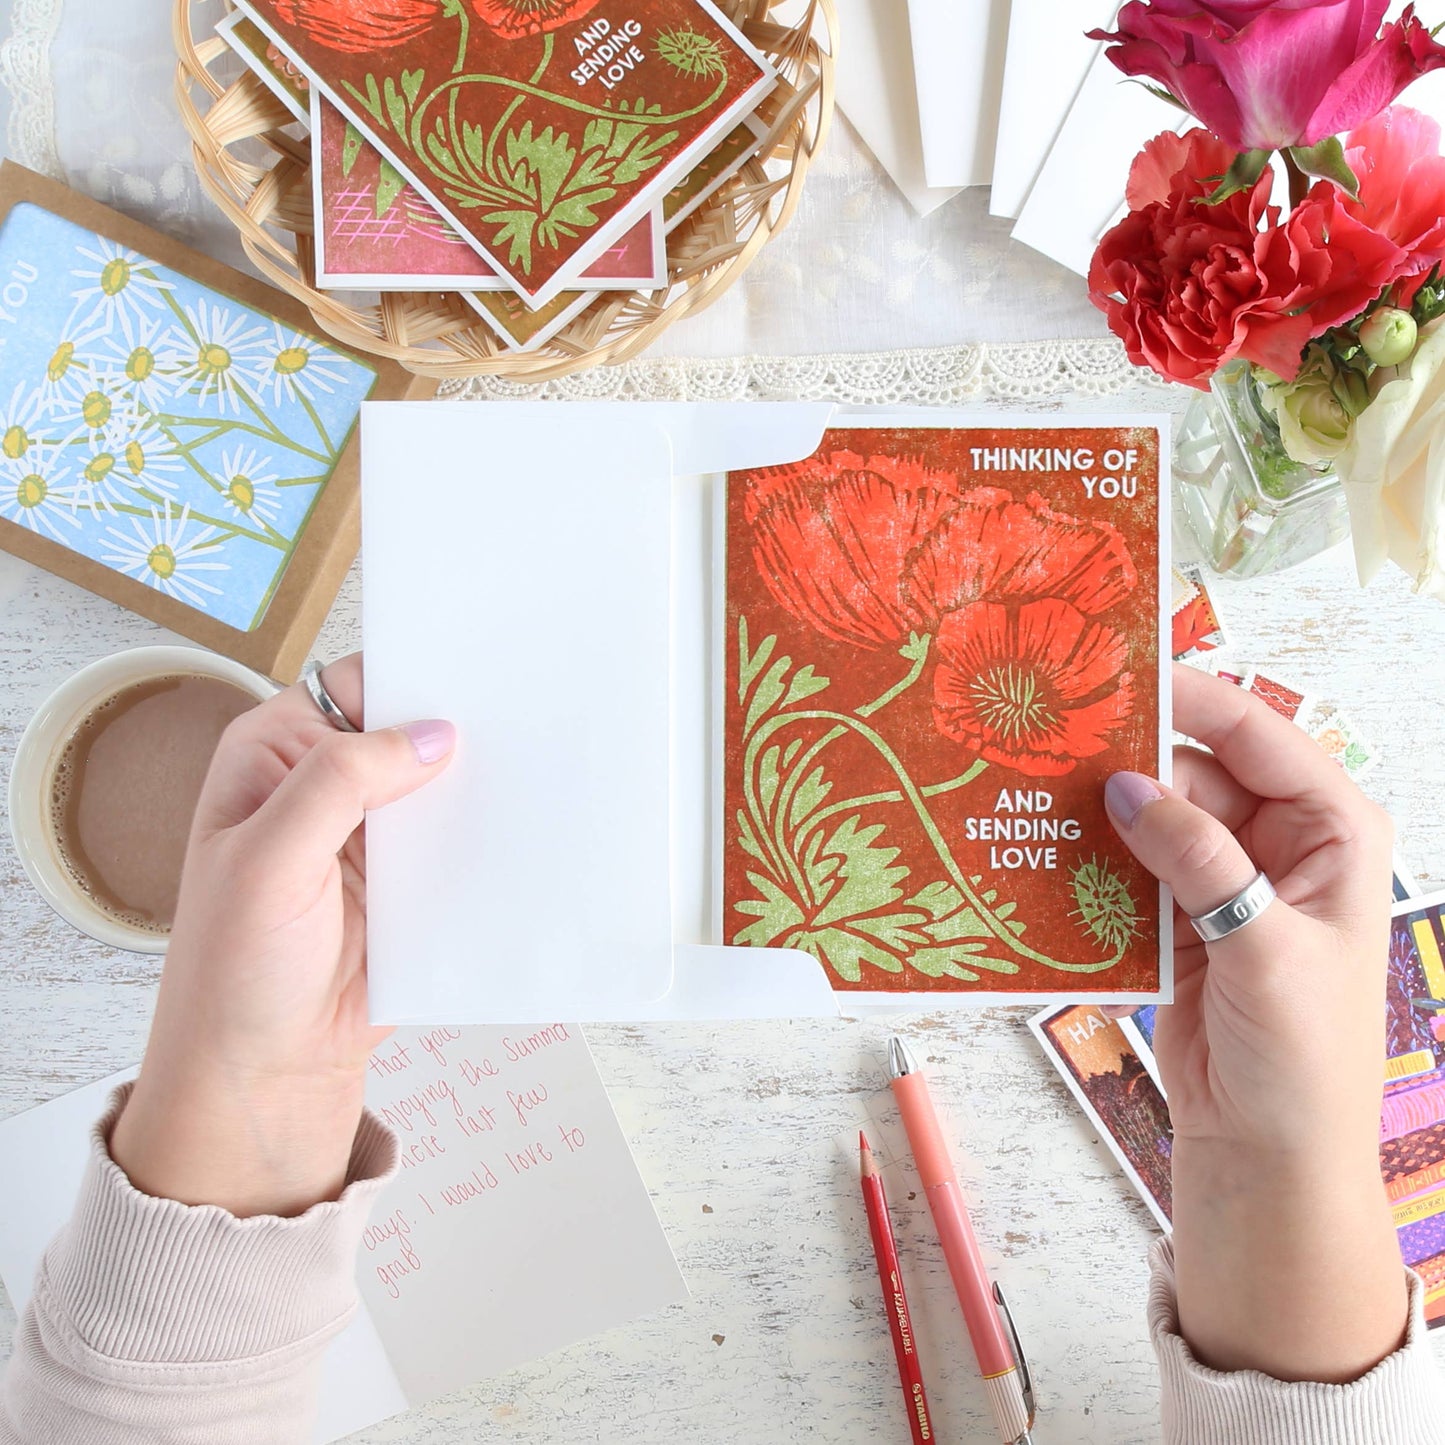 Thinking of You (Red Poppies) Friendship Card